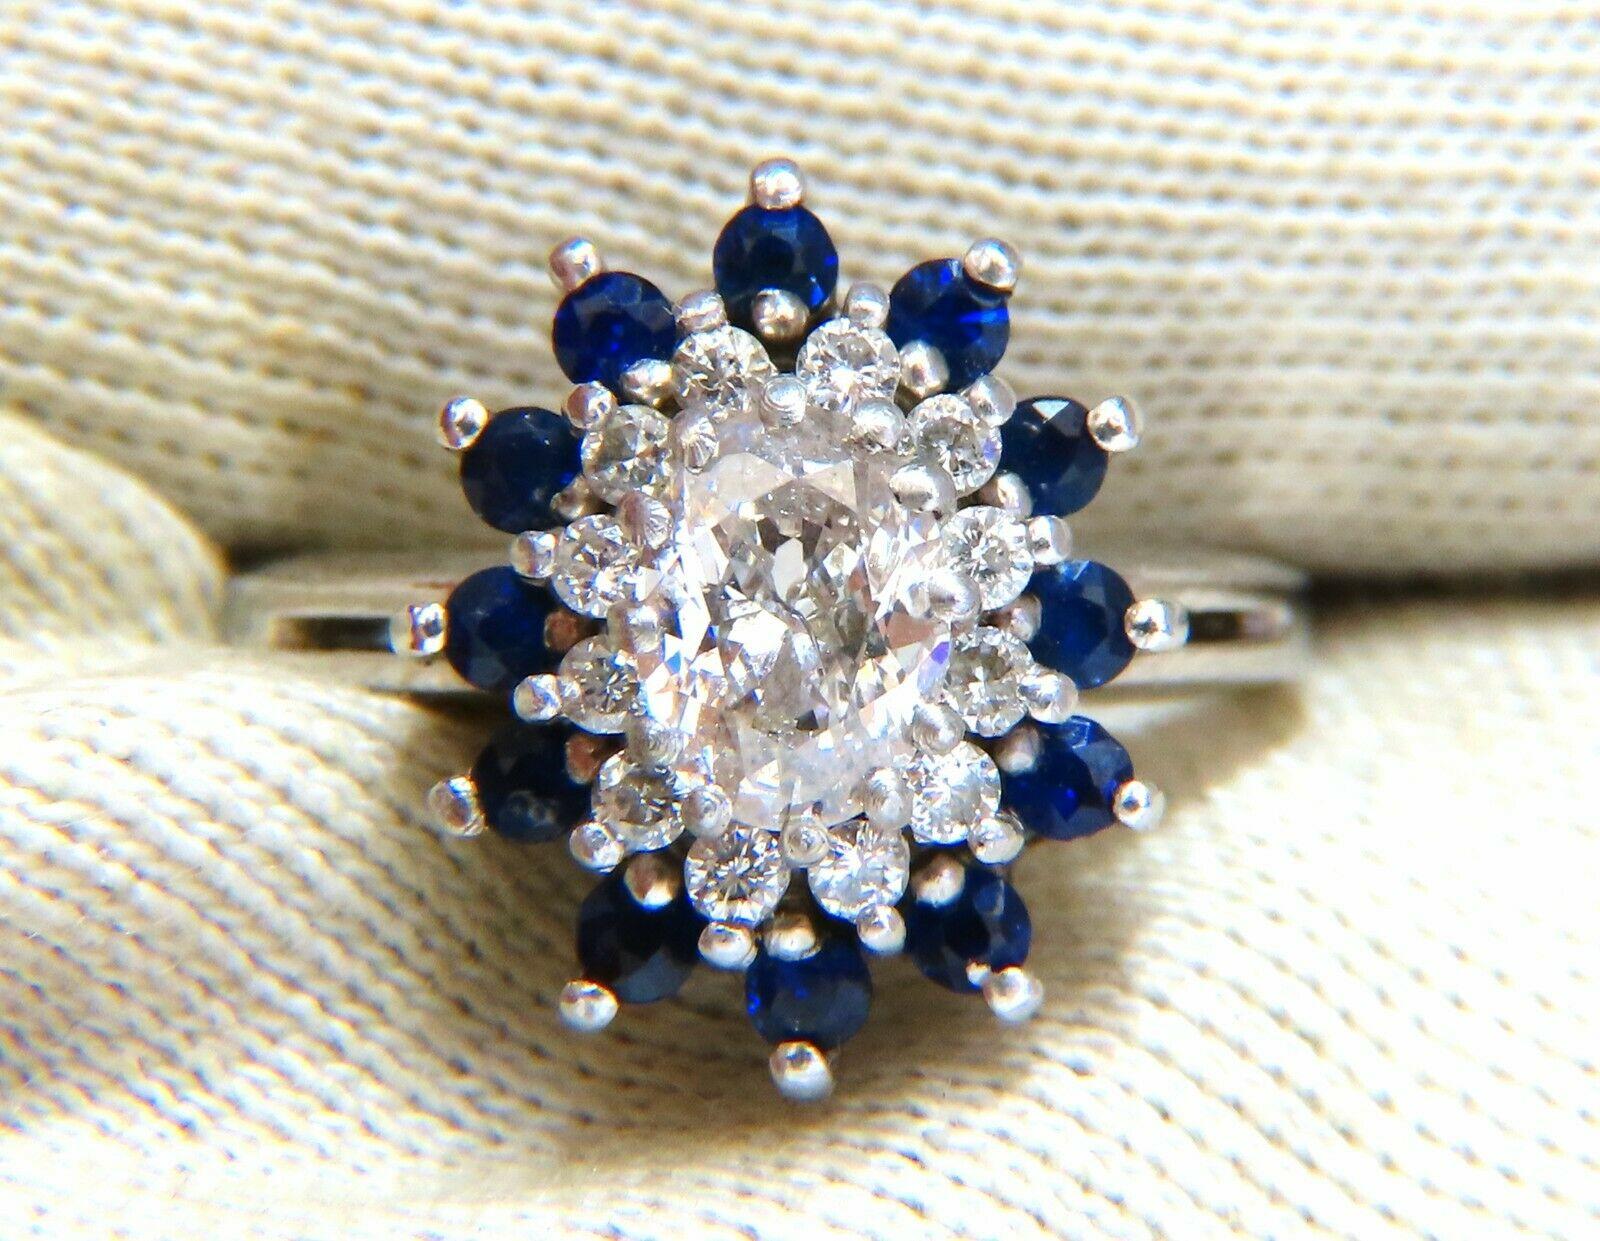 Sapphire & Diamonds Cluster Ring

.70ct Natural Oval Diamond

Full cut and Full Faceted.

I-color Si-2 clarity.

.70ct natural sapphires on sides

.30ct Natural Round Diamonds

H-color Si-1 Si-2 Clarity

8.4 grams 

Ring is 13 x 16mm.

Depth: